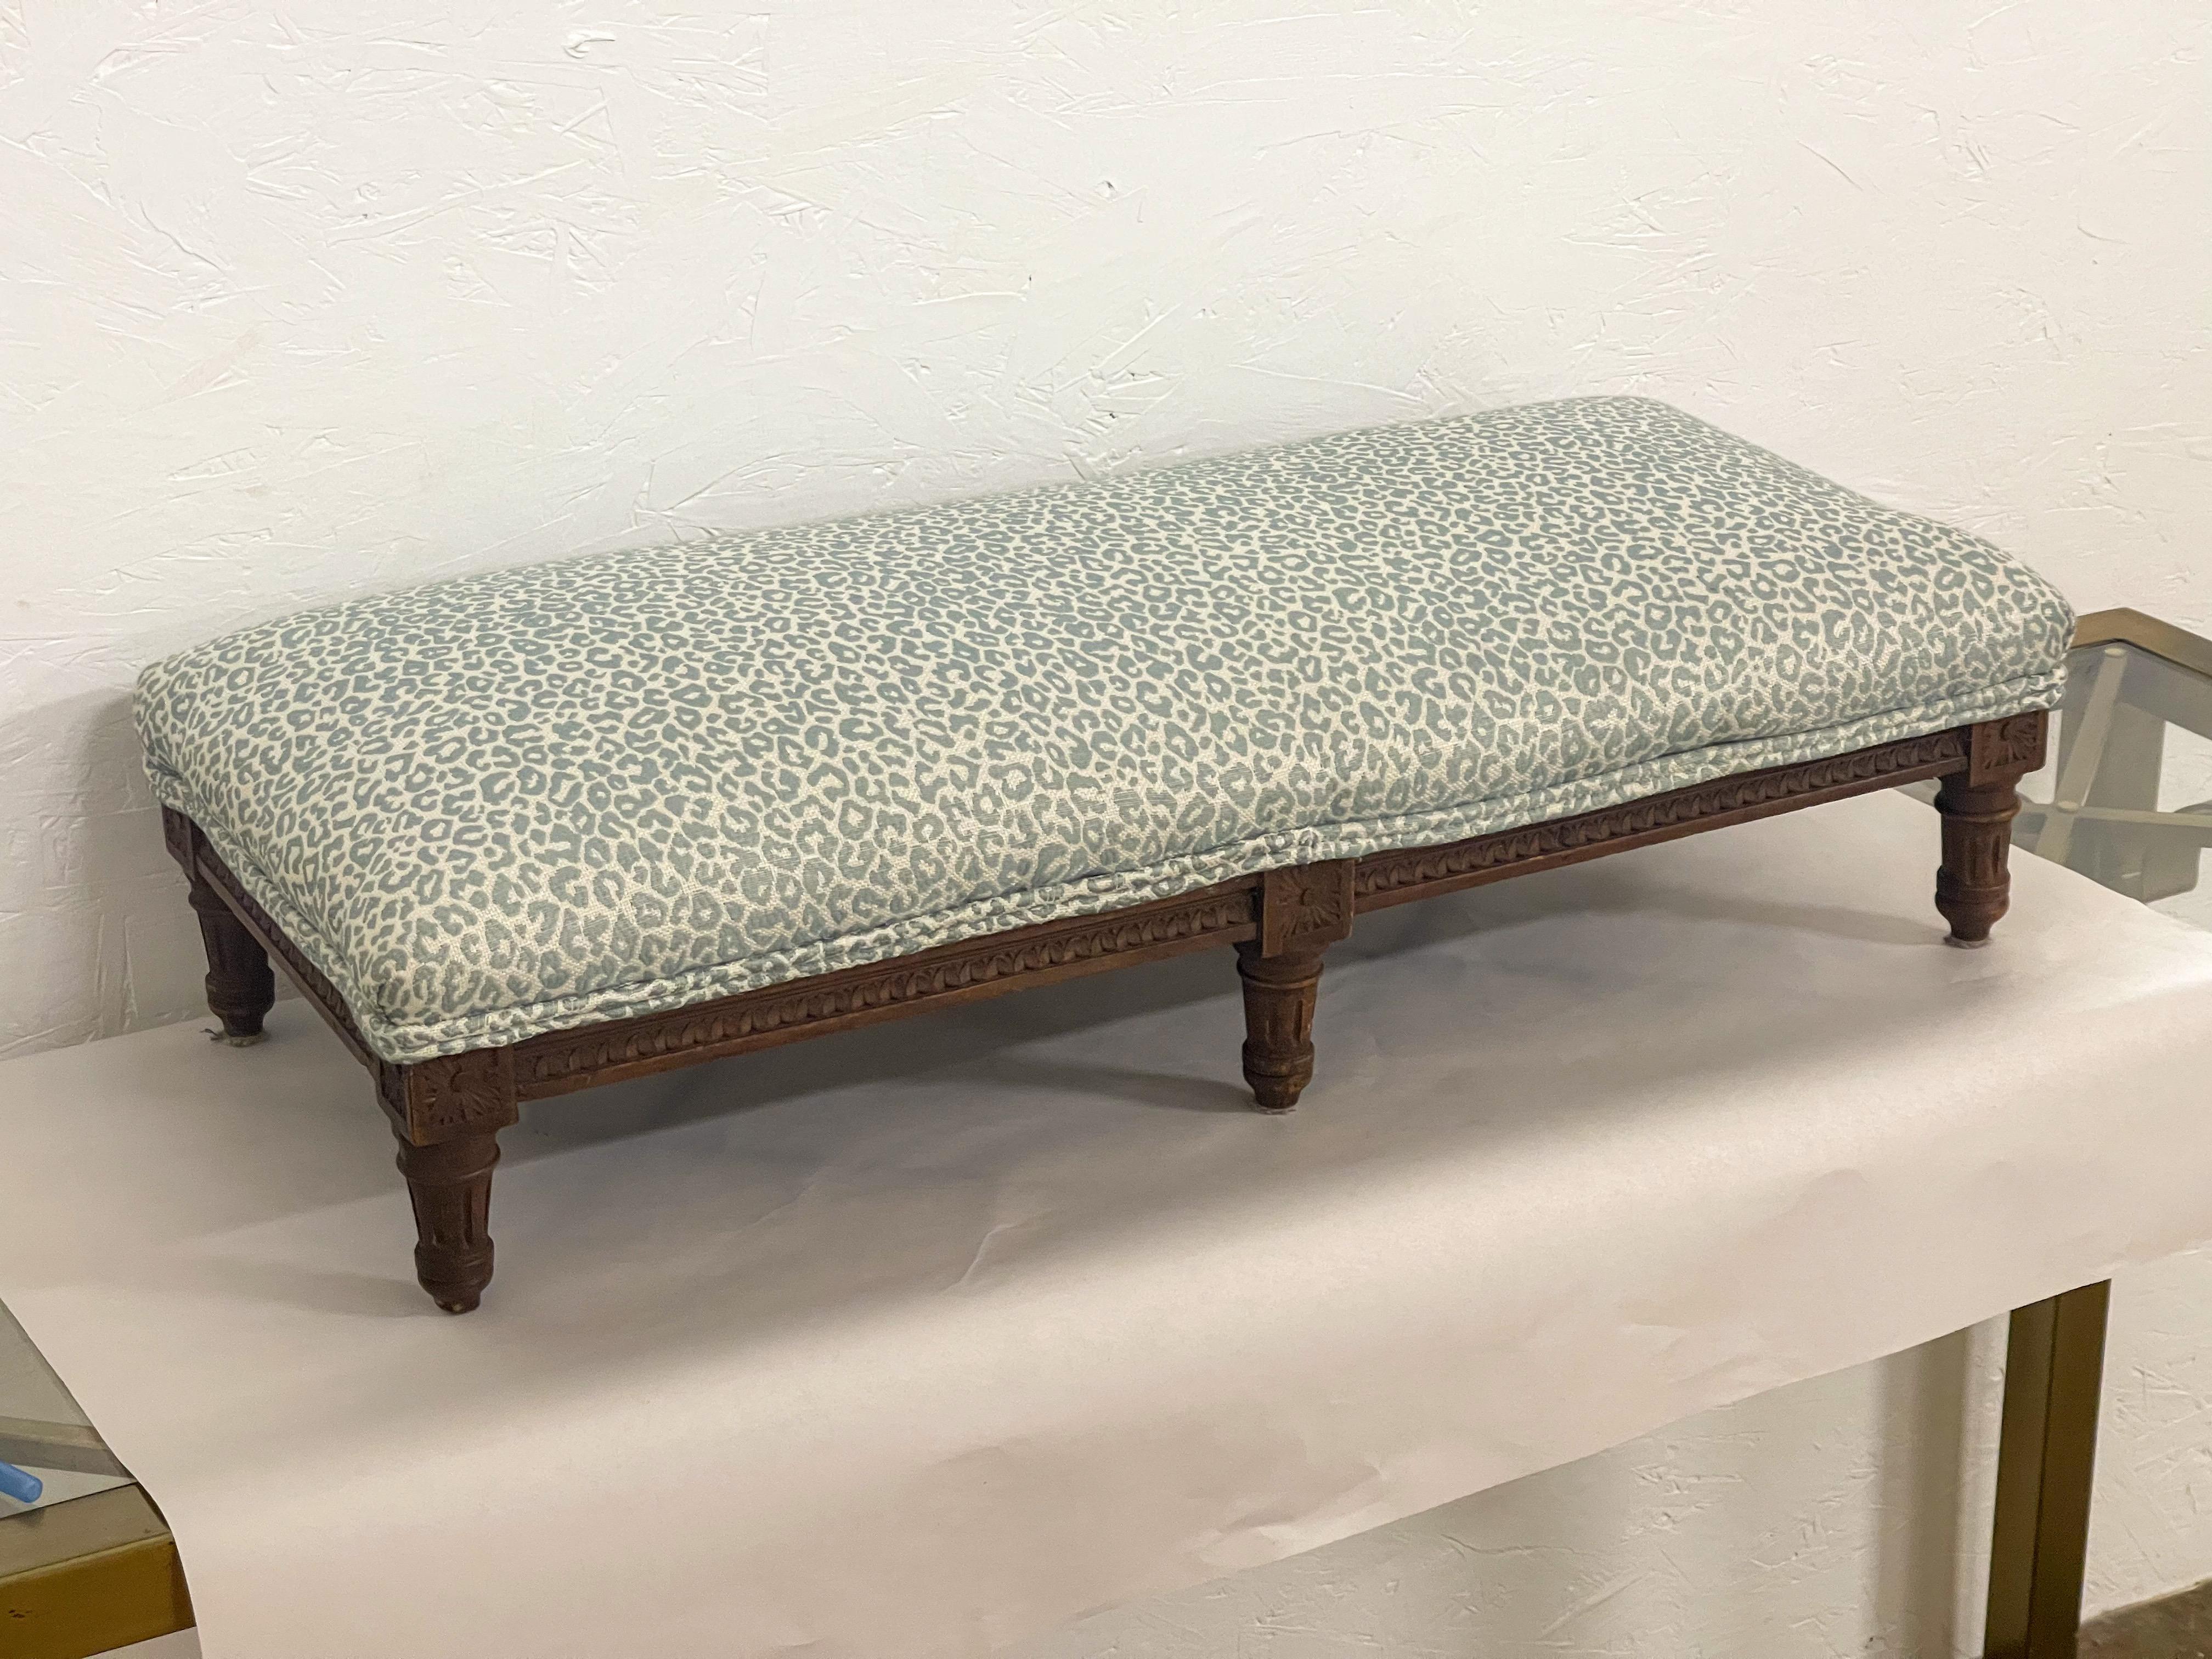 20th Century Antique French Carved Oak Ottoman In Celadon Leopard Upholstery 